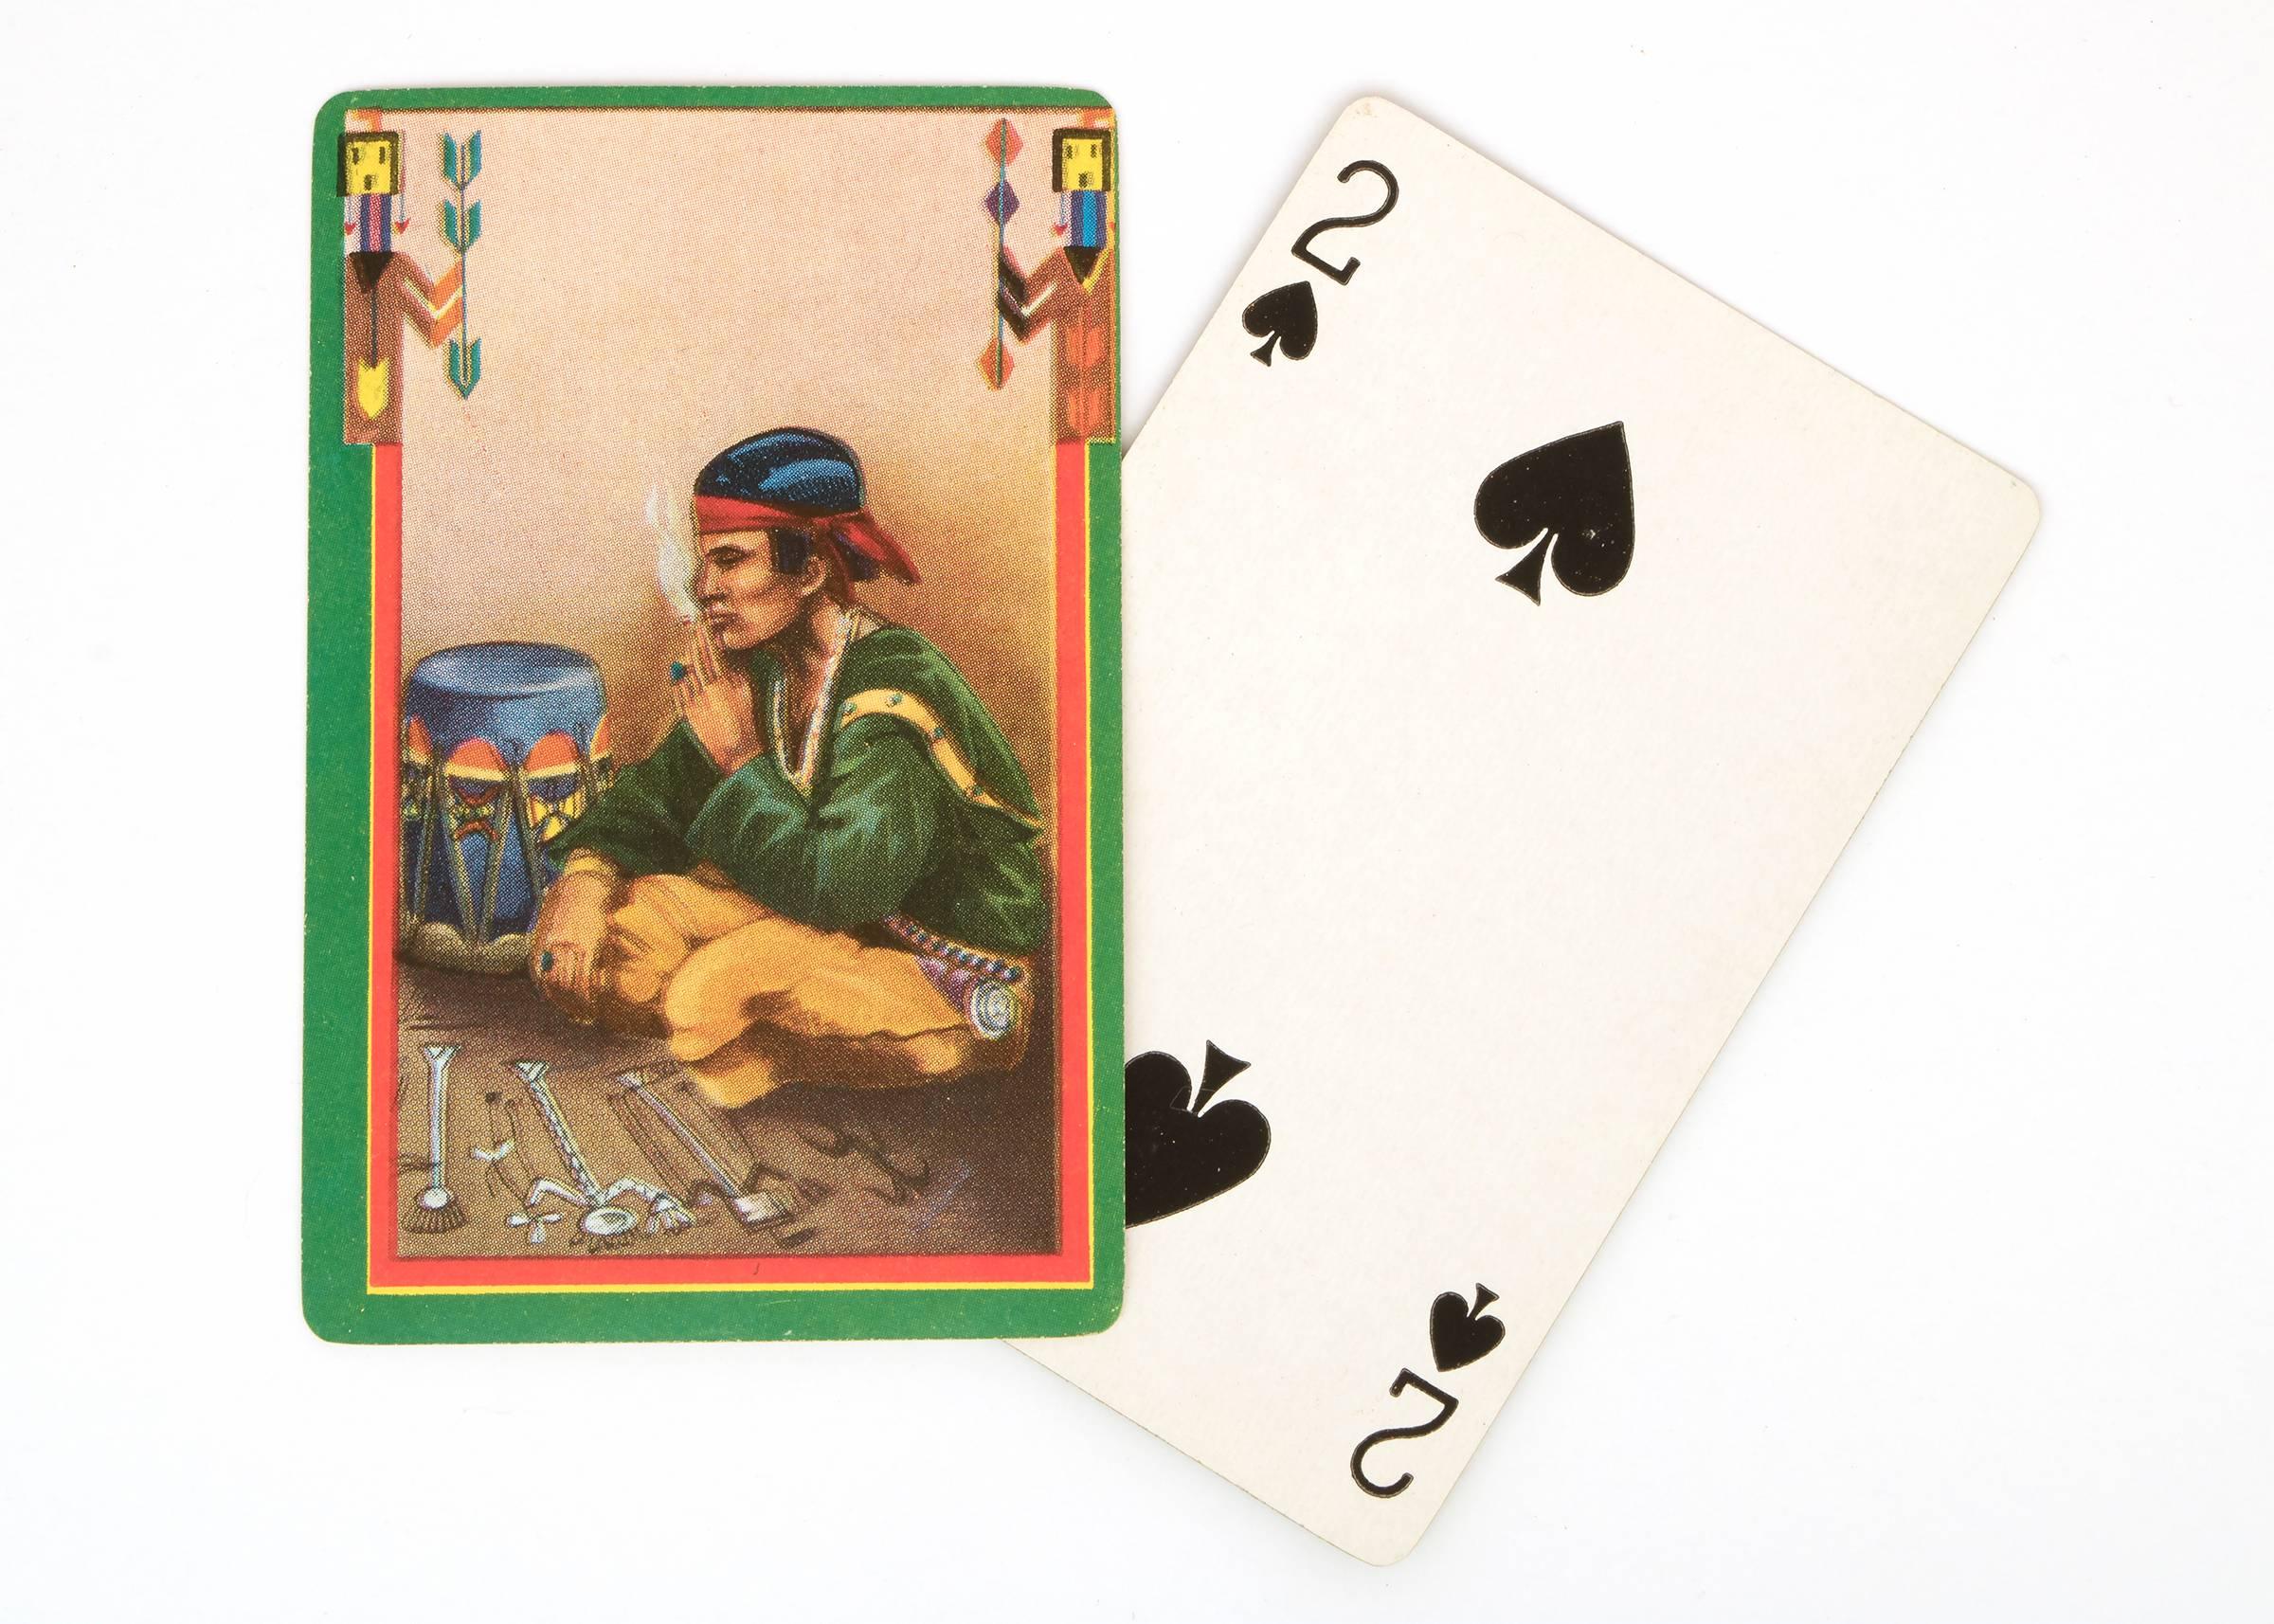 Two decks of playing cards - first set has a weaver; second has an Indian smoking - Arco Brand, Chicago.

Expedited and International shipping is available; please contact us for an estimate.